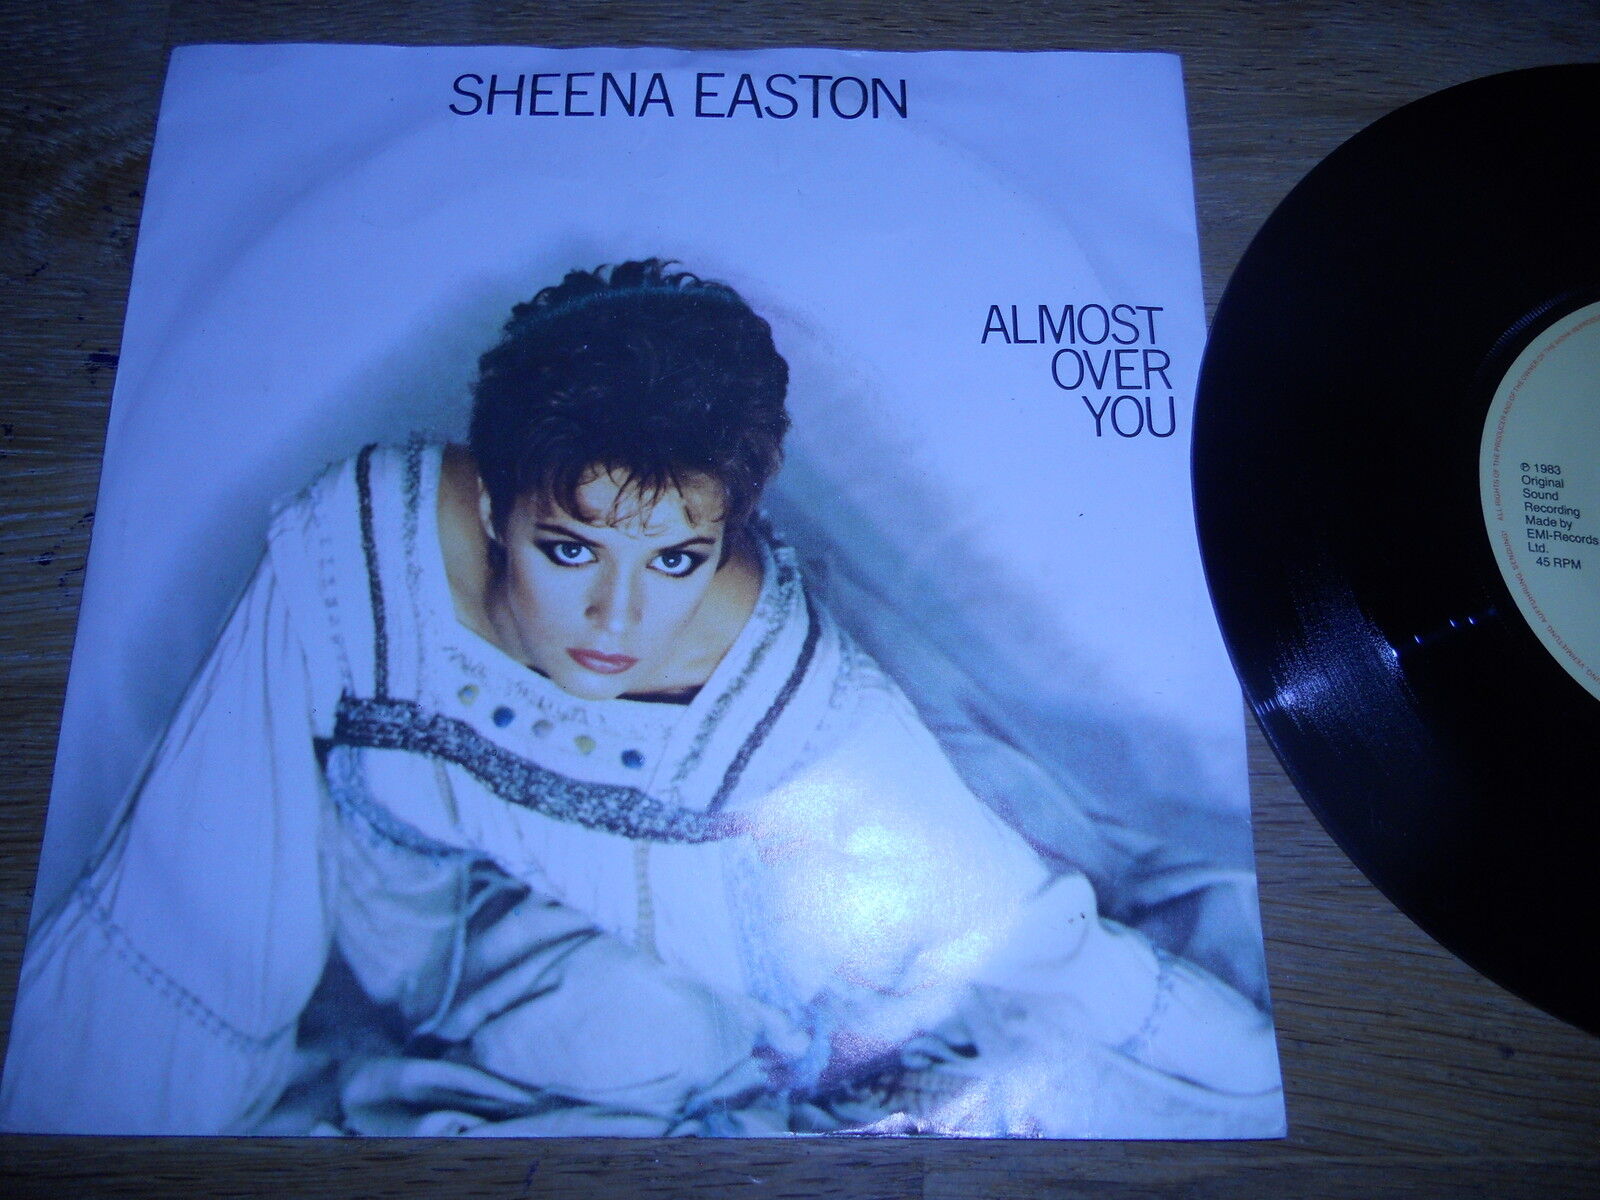 SHEENA EASTON "ALMOST OVER YOU / I DONT NEED YOUR WORD" 1983 EMI RECORDS HOLLAND